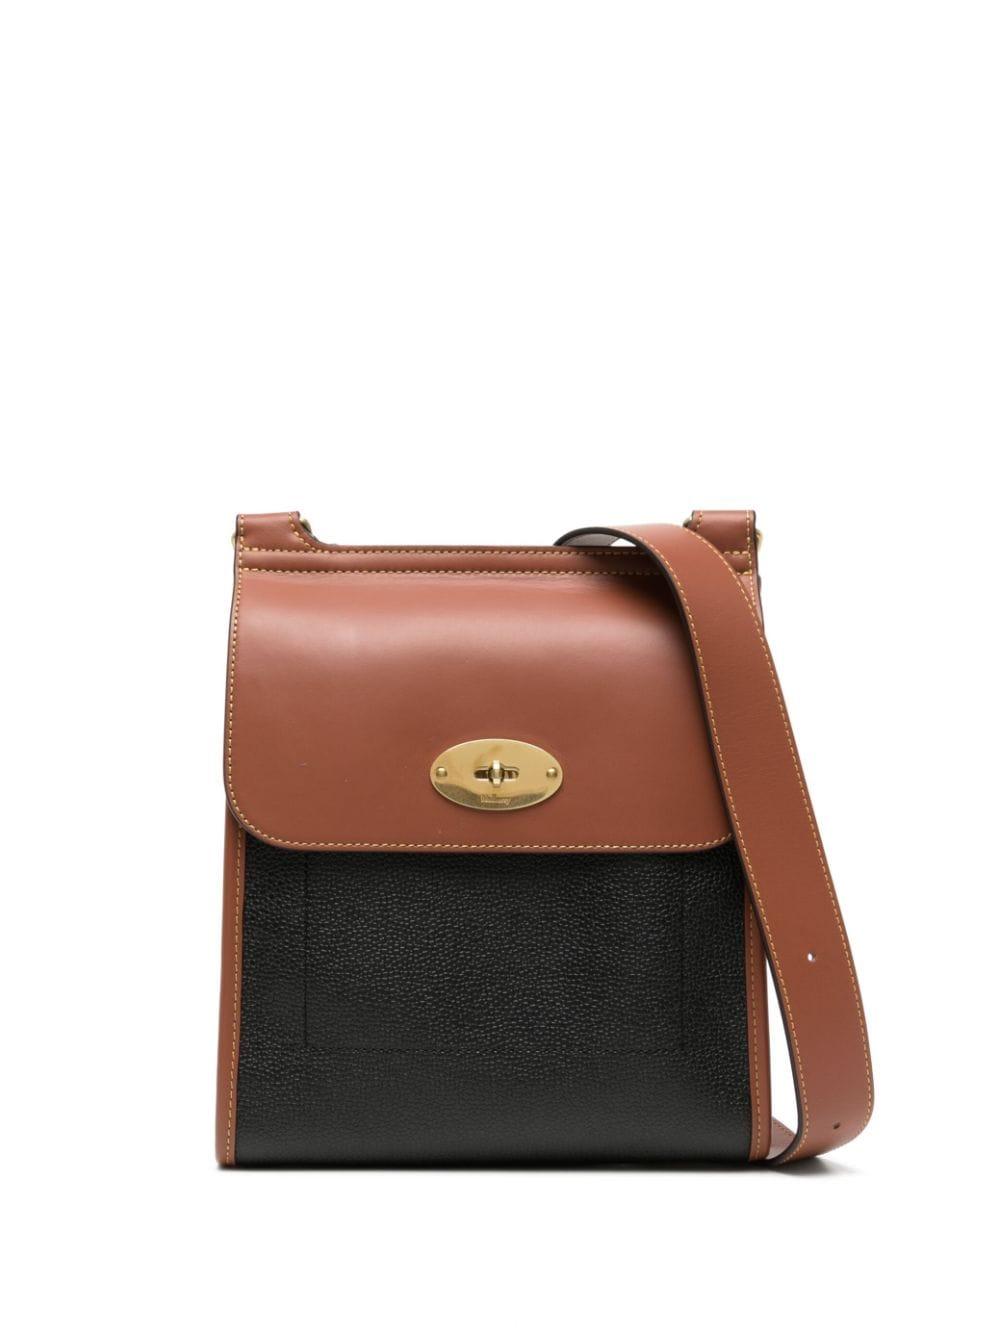 Mulberry Small Antony Leather Messenger Bag in Brown for Men | Lyst